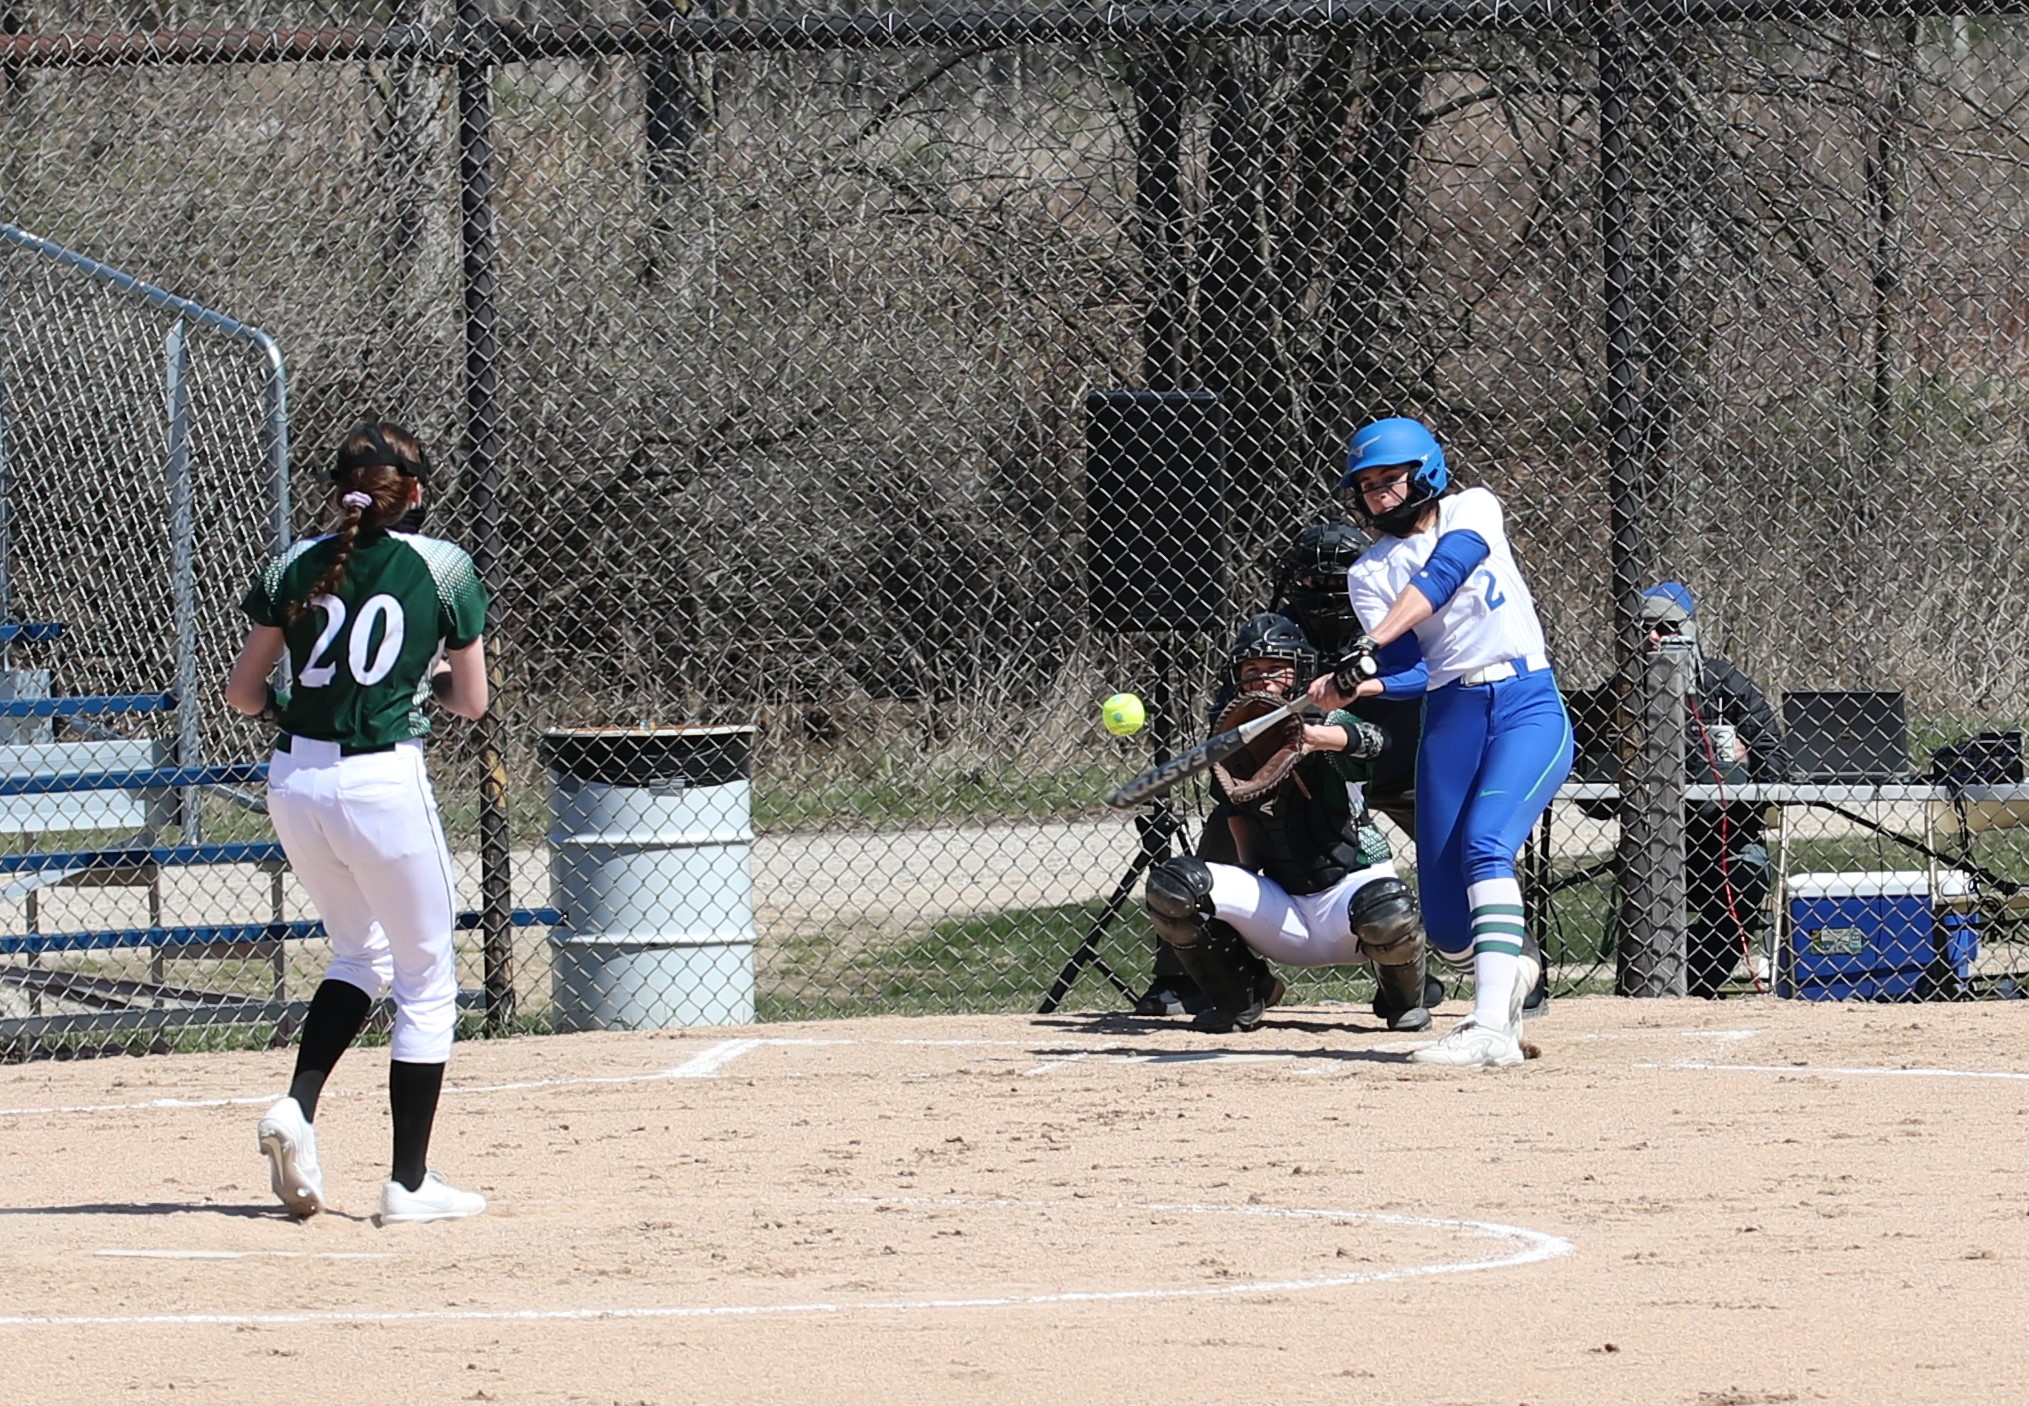 Sarah Wynn making contact with a pitch